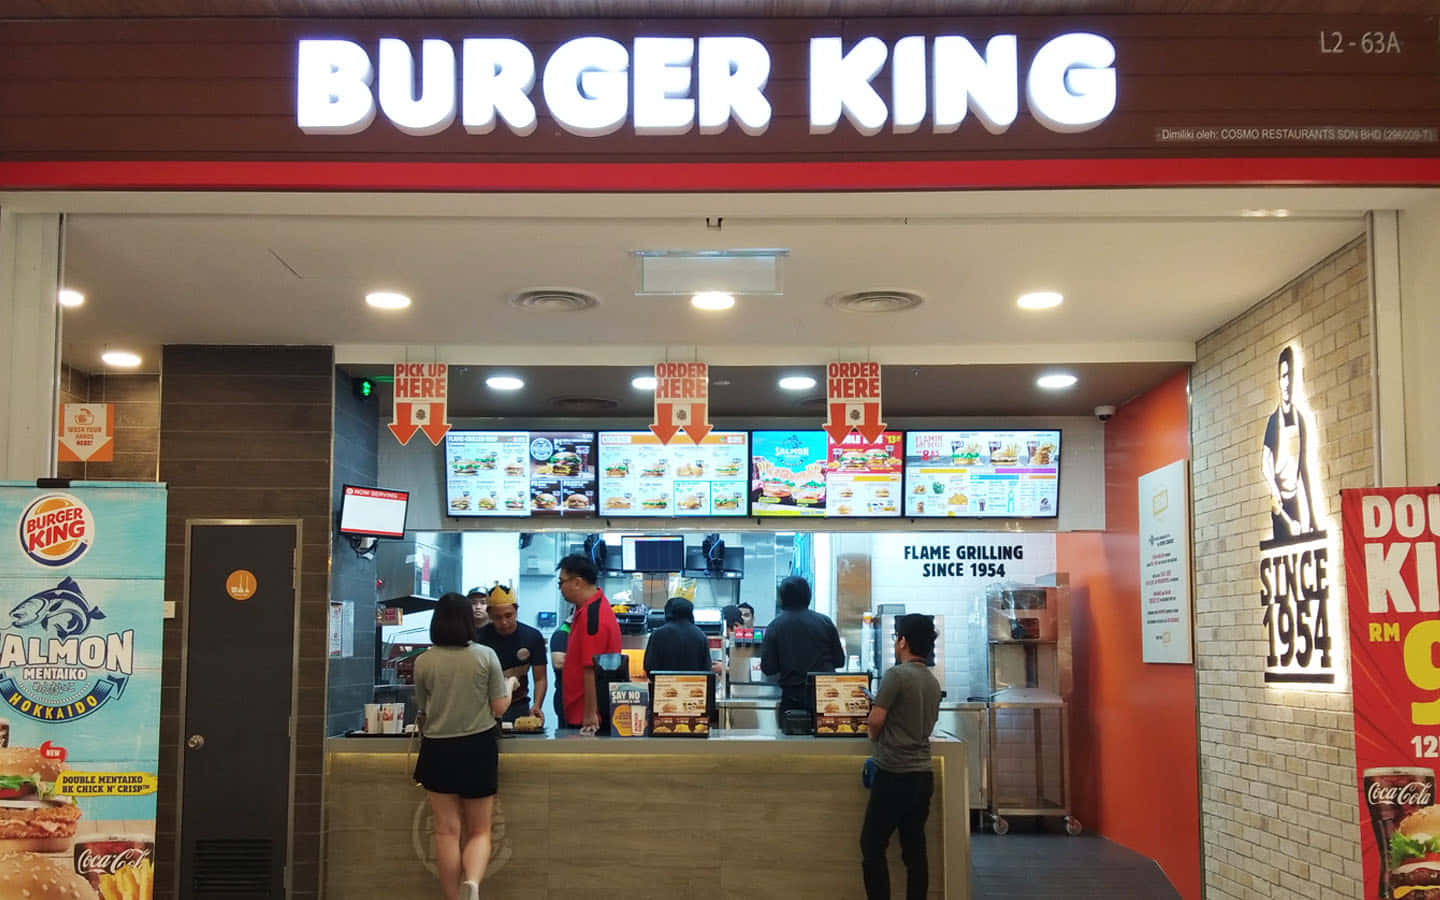 Sorry,i Think There Is Some Mistake, You Asked For Translations Of Sentences Related To Computer Or Mobile Wallpaper And This Sentence Seems To Be About A Food Item At Burger King. Shall I Provide You With The Correct Sentences To Be Translated?